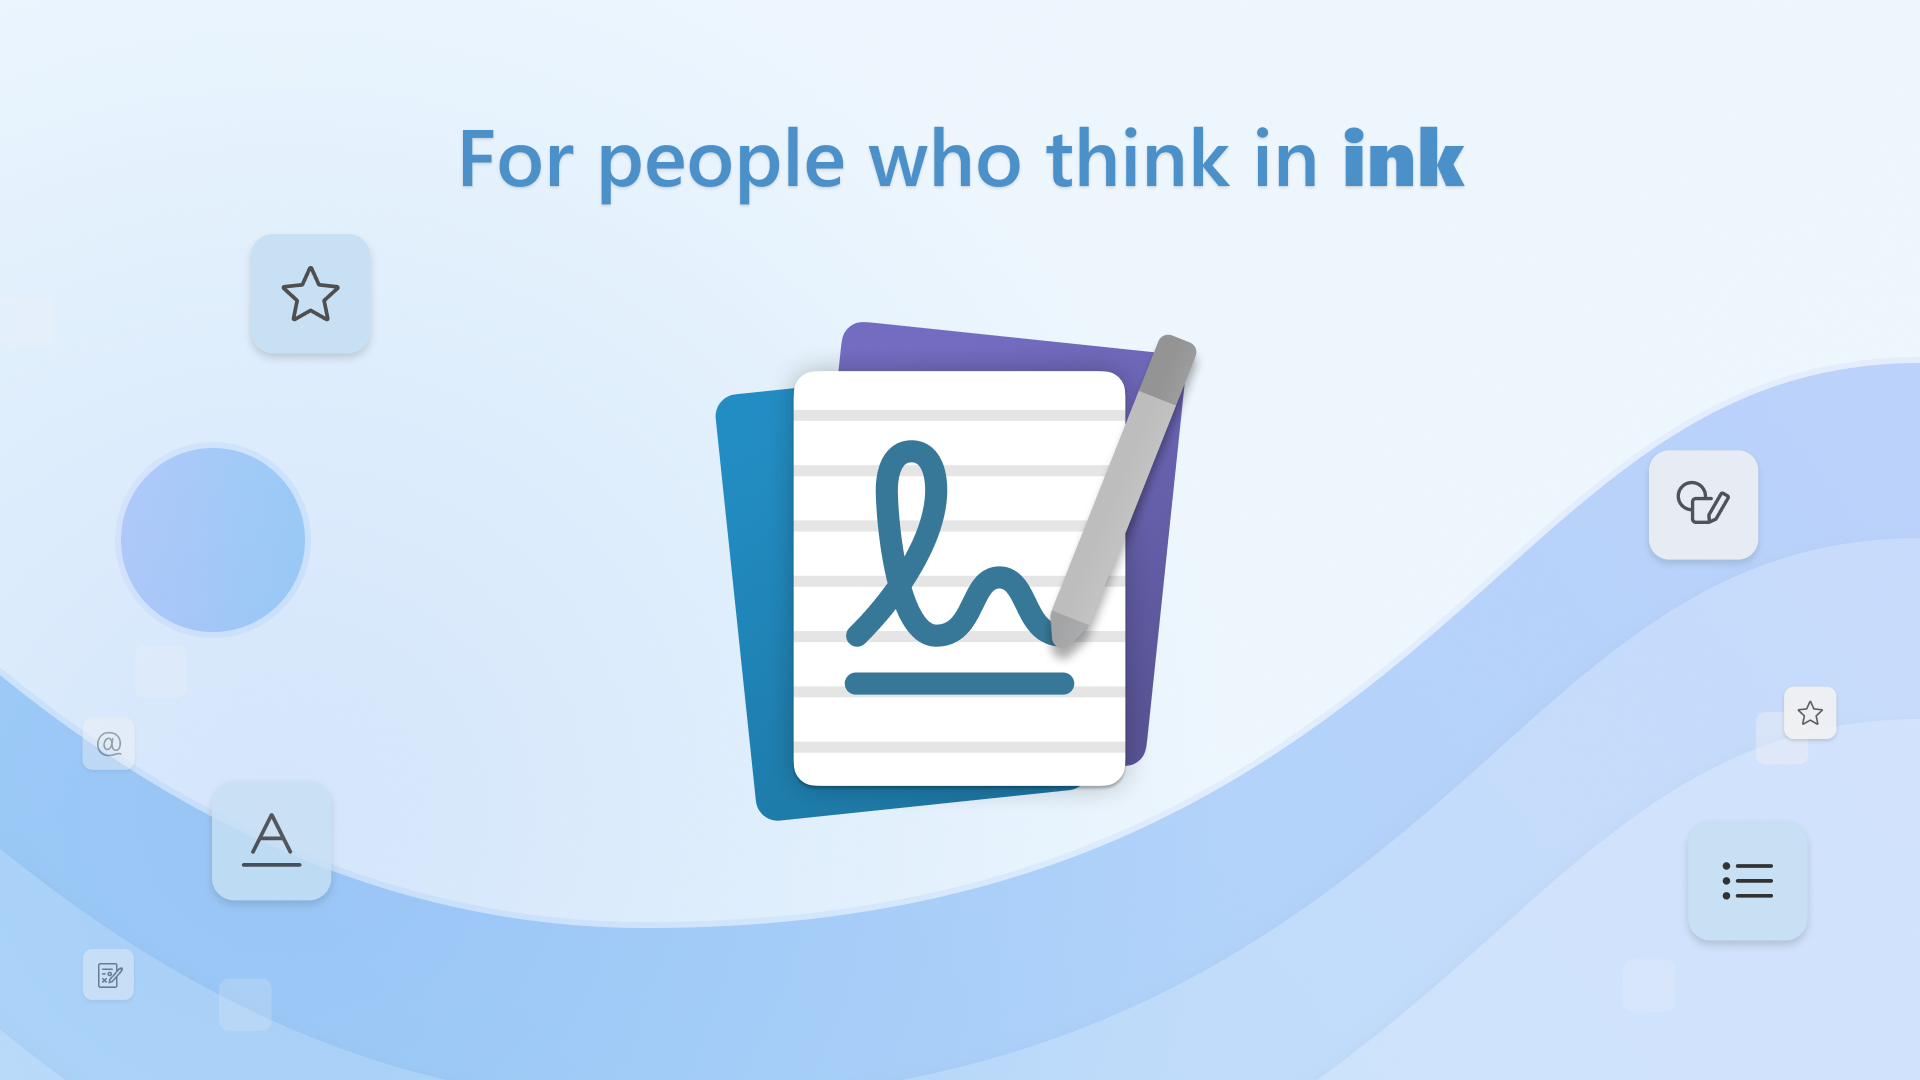 The logo of Journal with the caption "for people who think in ink"